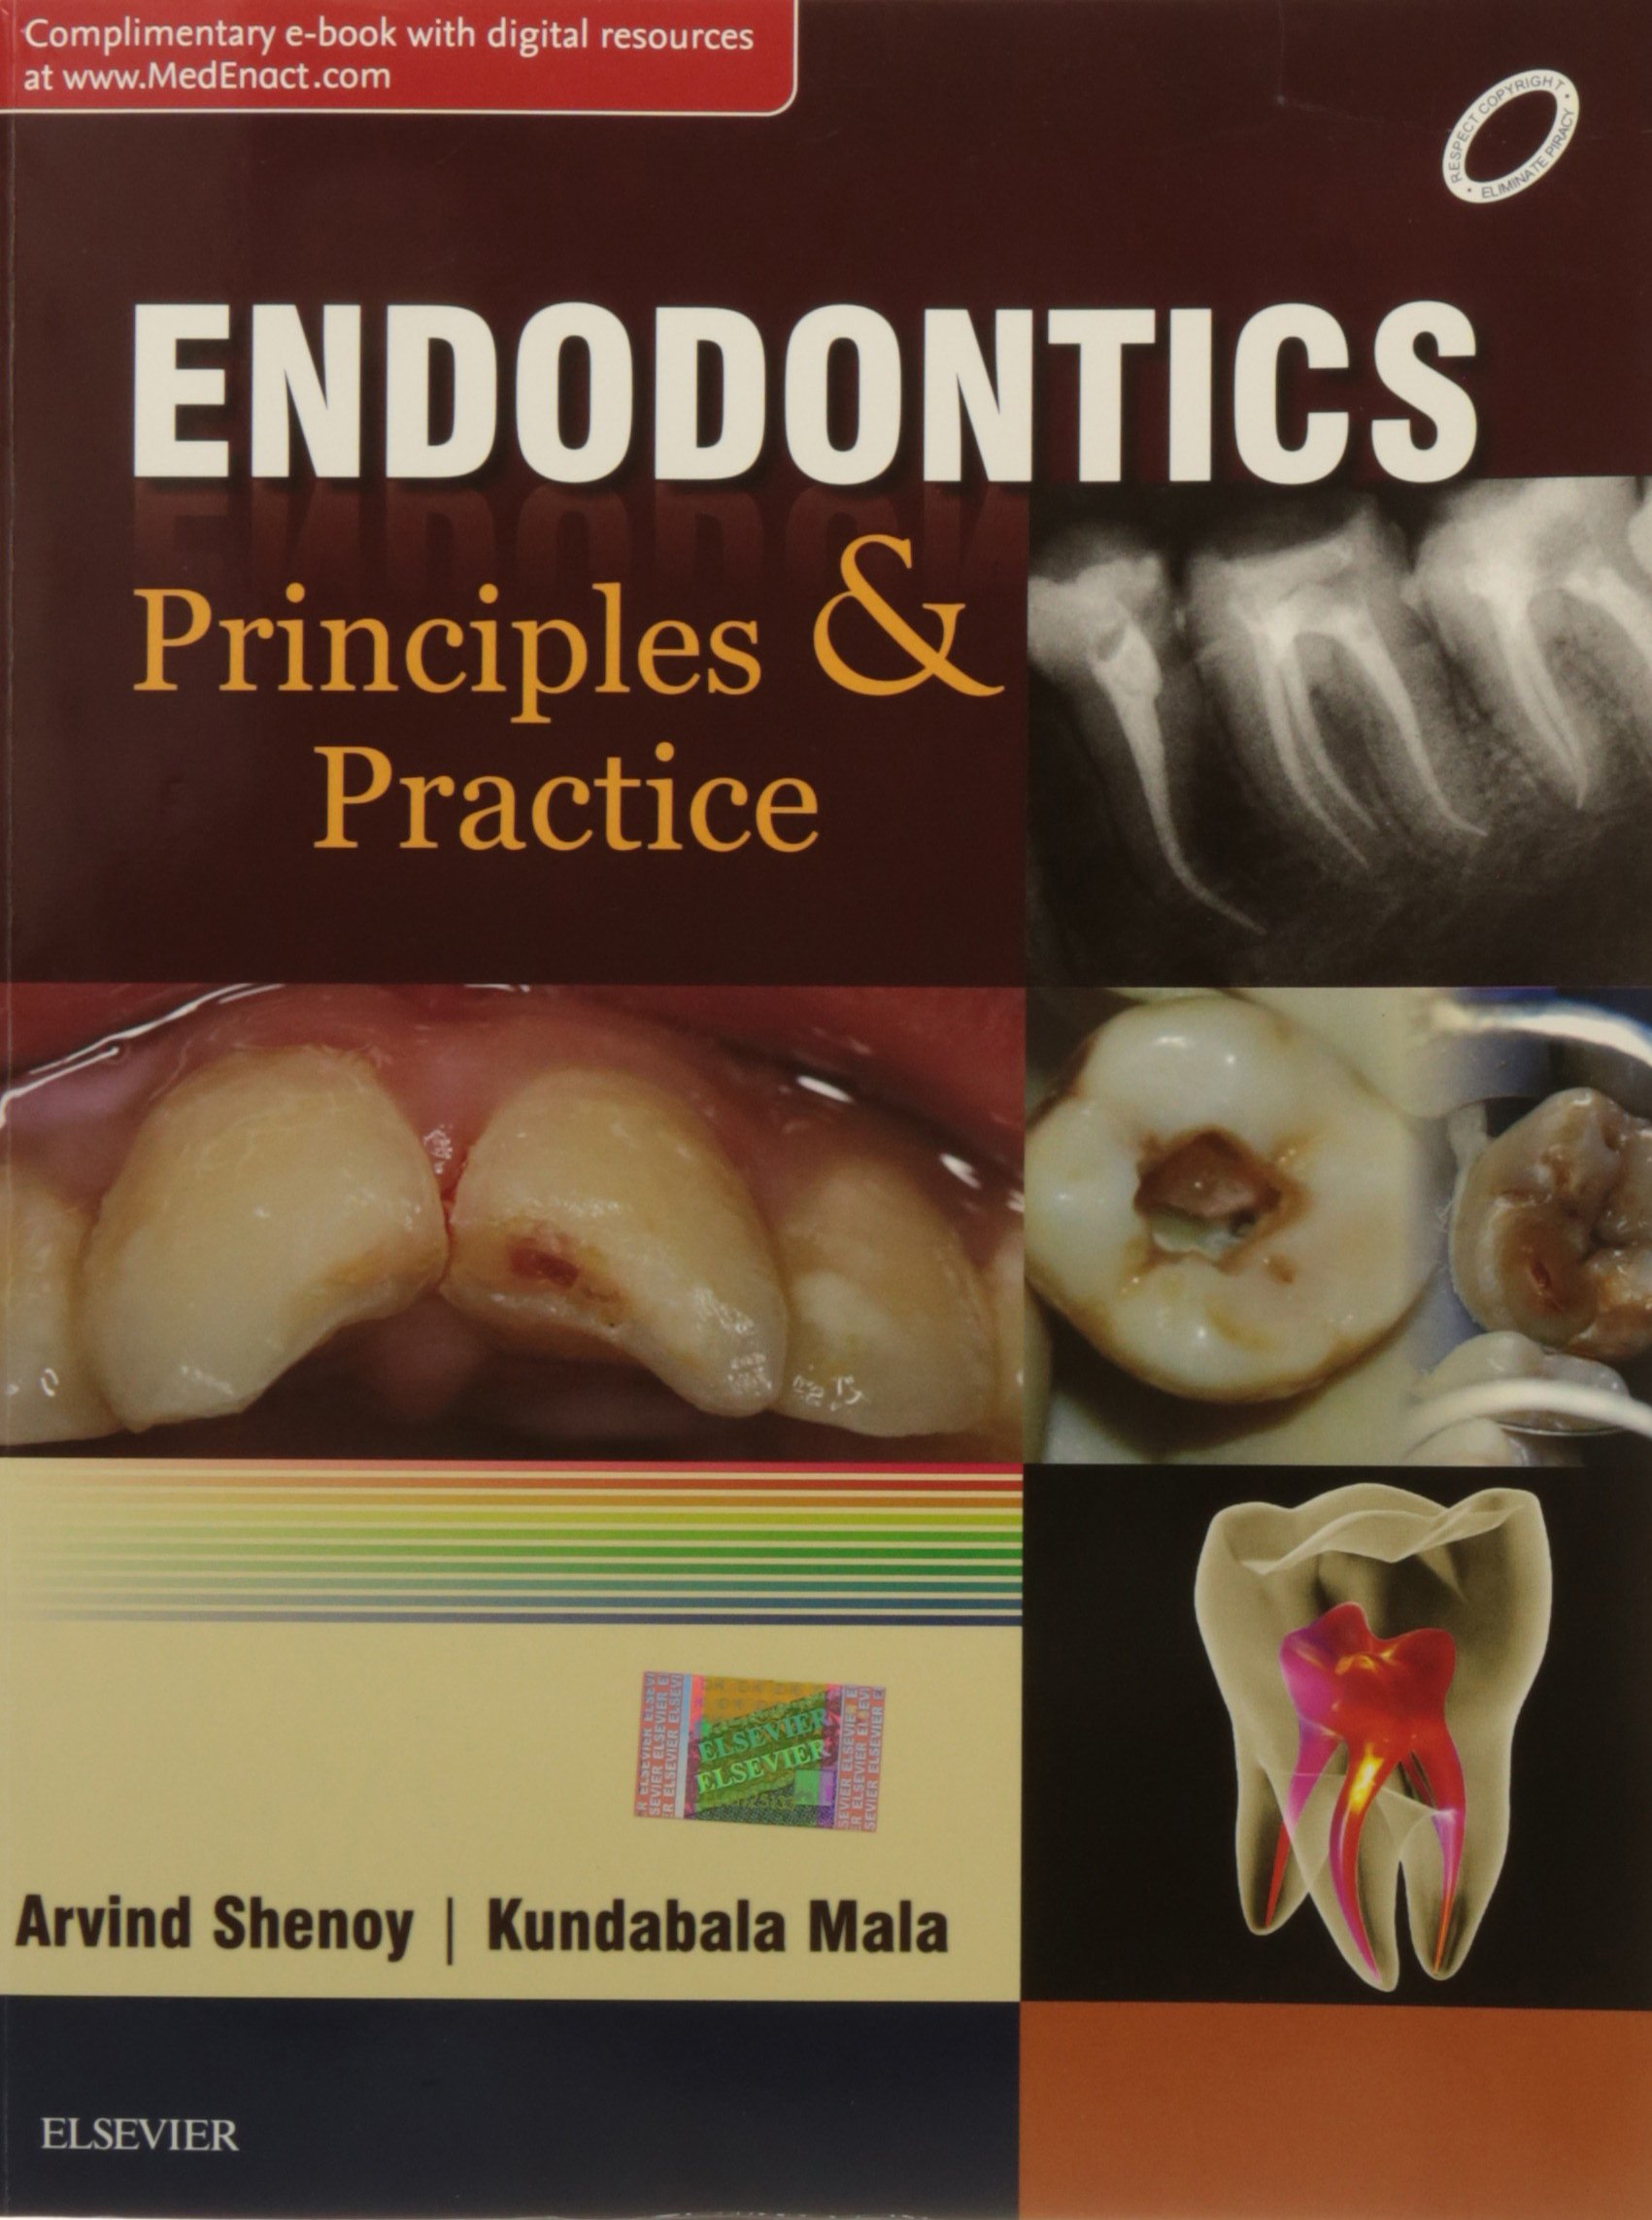 endodontics-principles-and-practice-complimentary-e-book-with-digital-resources